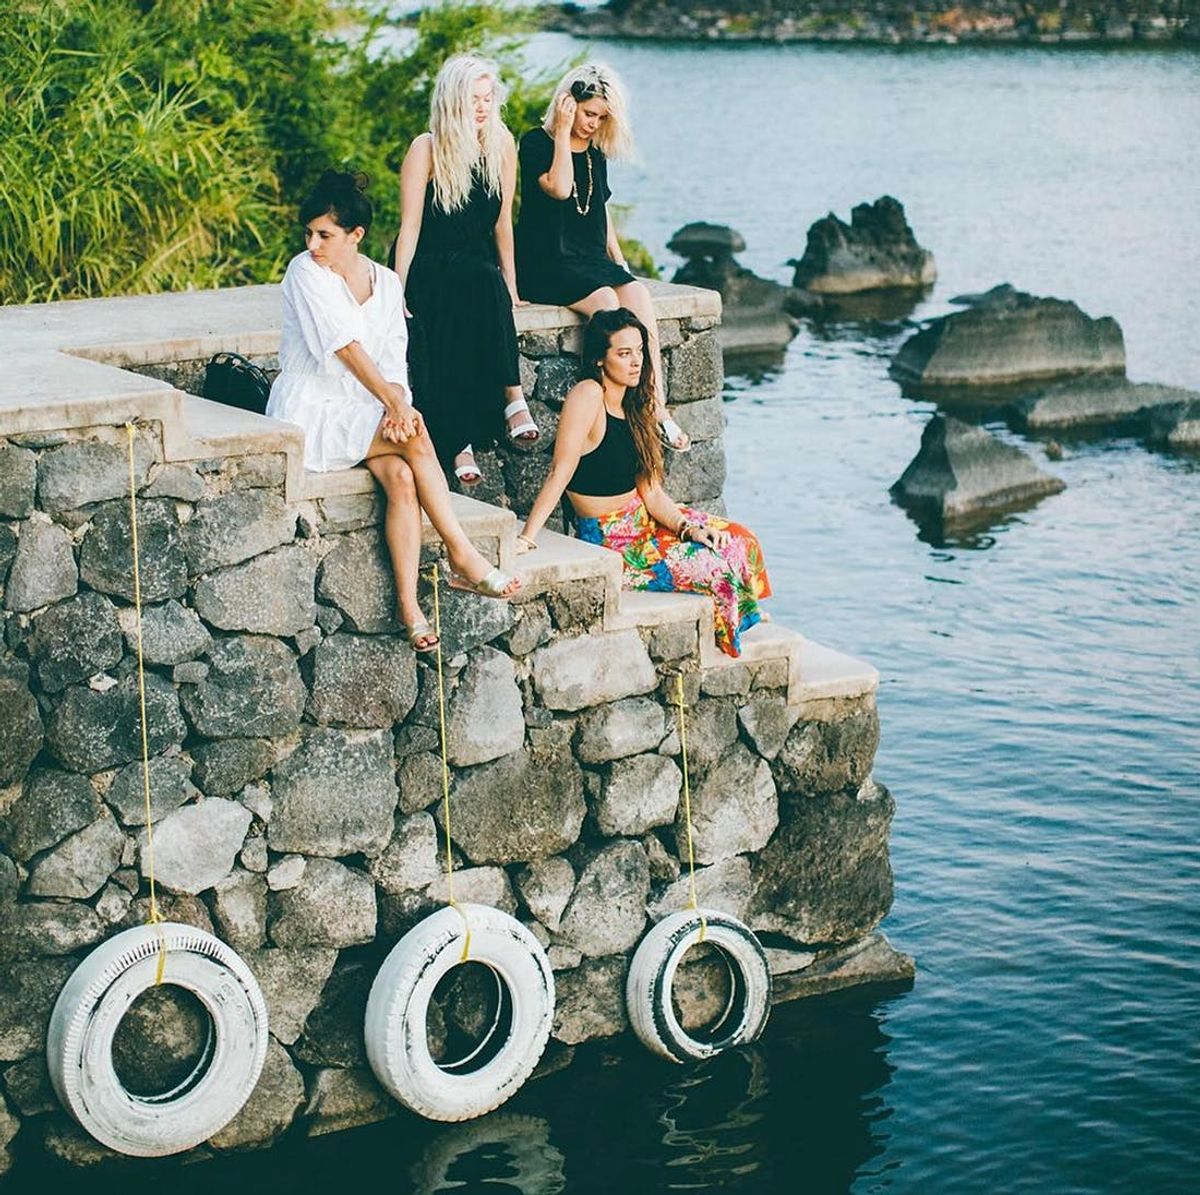 This Creative Girl Gang’s Tropical Vacay Will Give You Serious #SquadGoals